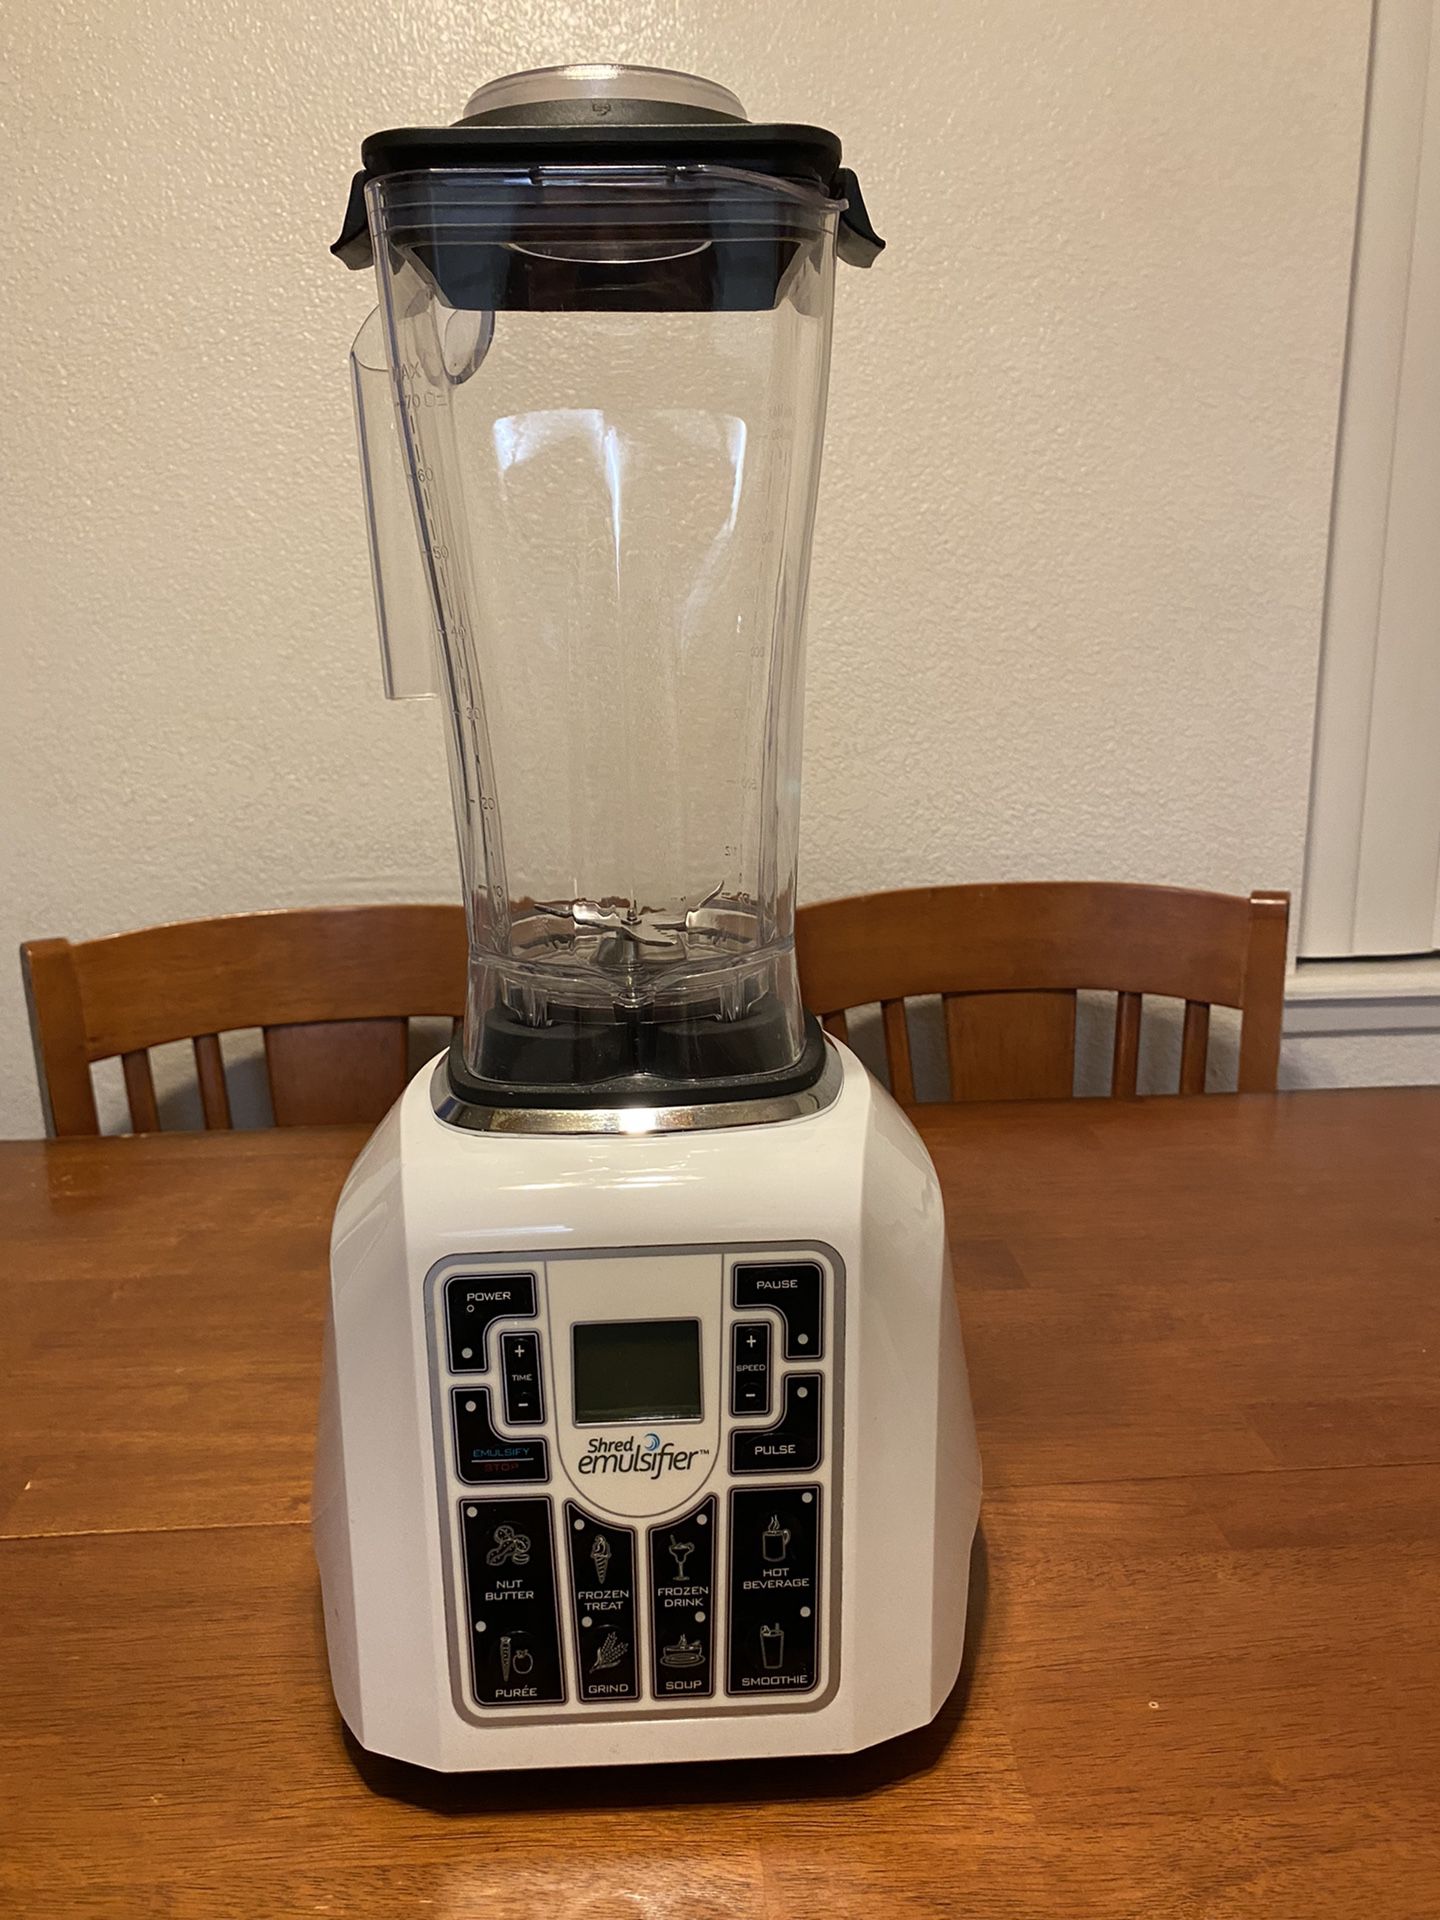 Cooks 5 in 1 Power Blender (Brand New) for Sale in San Diego, CA - OfferUp